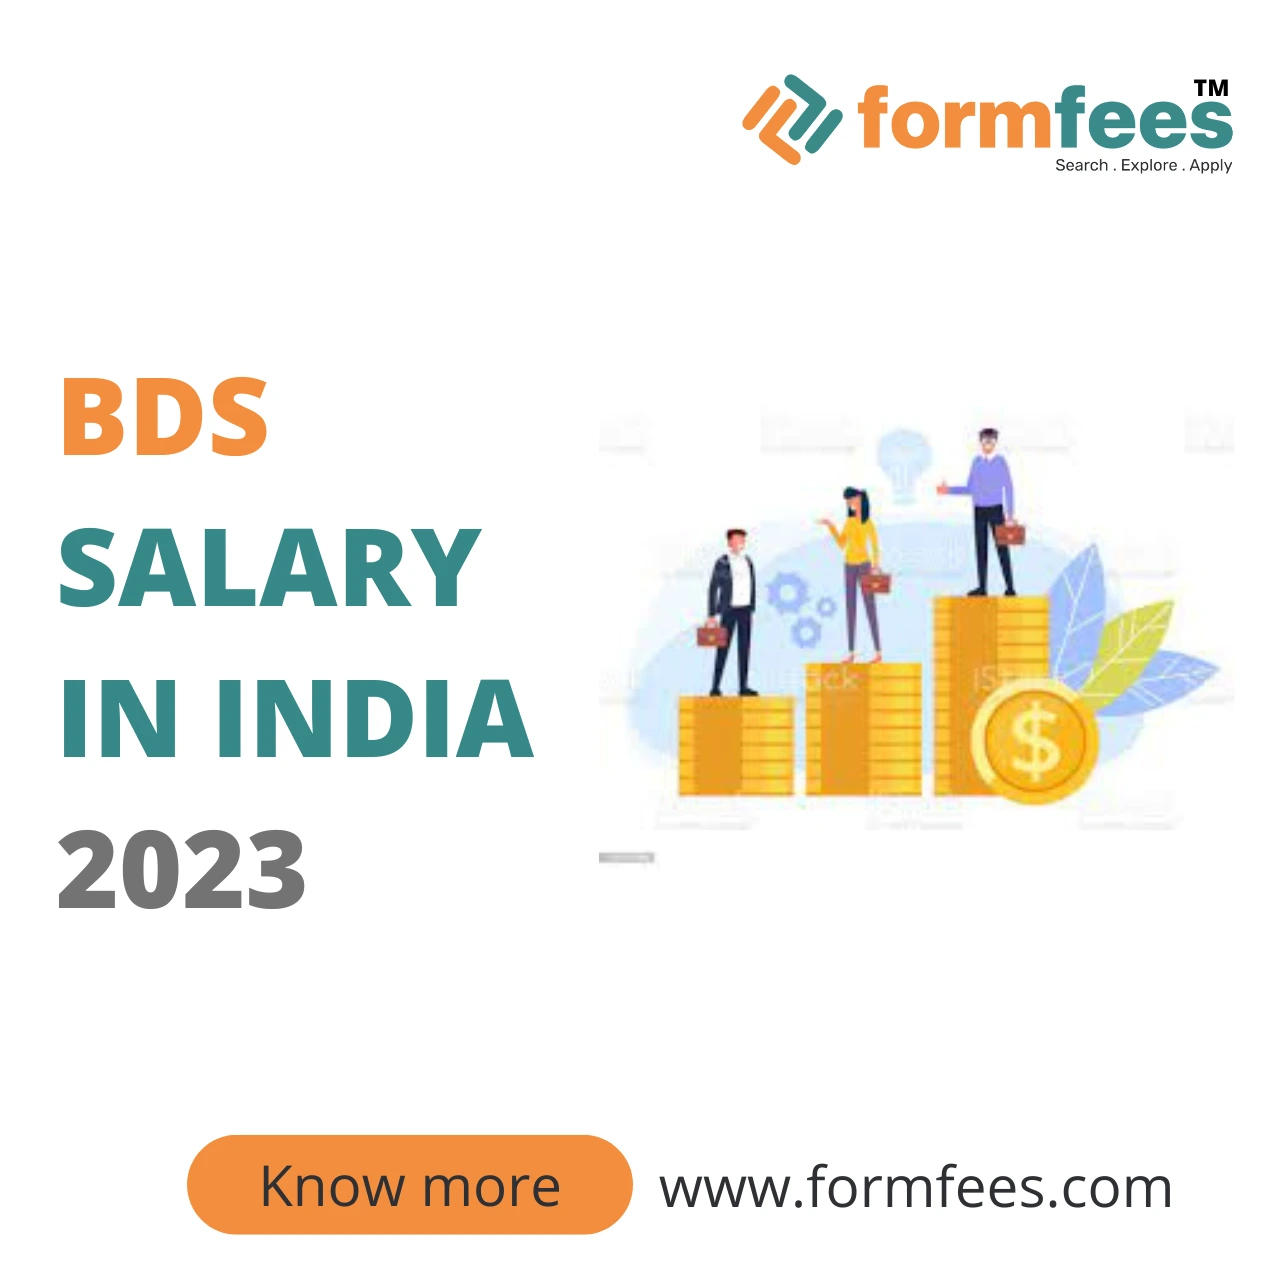 BDS SALARY IN INDIA 2023